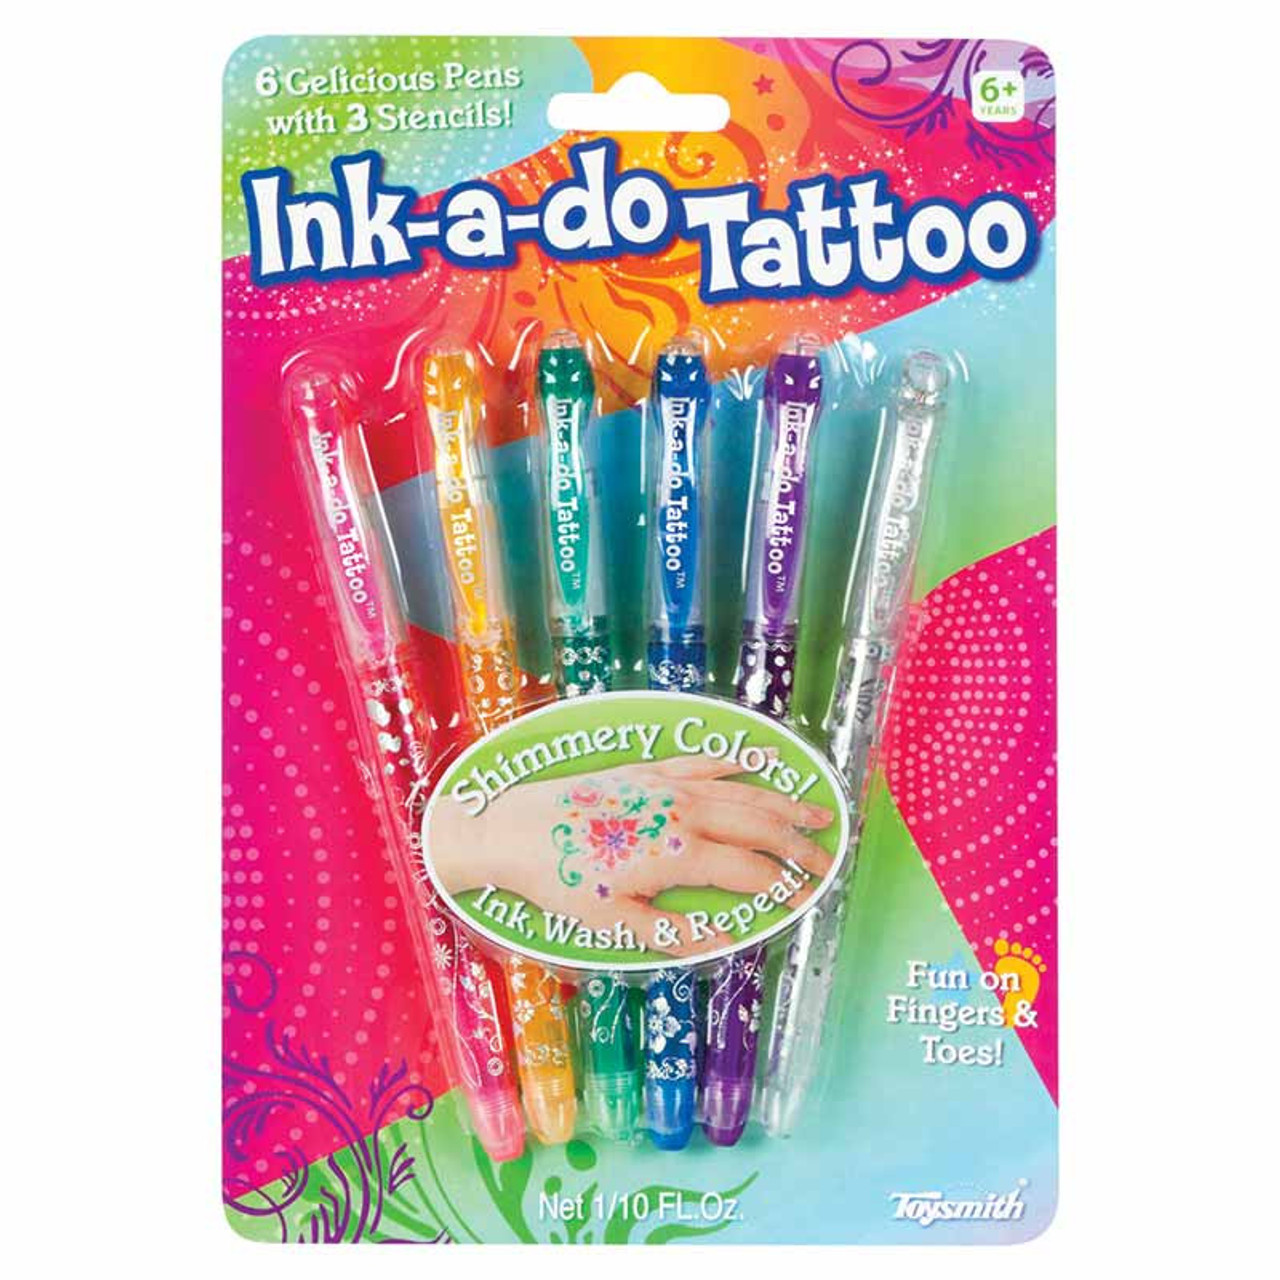 Buy Jim&Gloria Temporary Tattoo Pens Fake Tattoos Kit Removable Face Body  Tattoo Paint Markers For Halloween Men Women Teen Girls Trendy Stuff,  Unique Trending Gifts For Teenage Boys Kids Or Adult Online